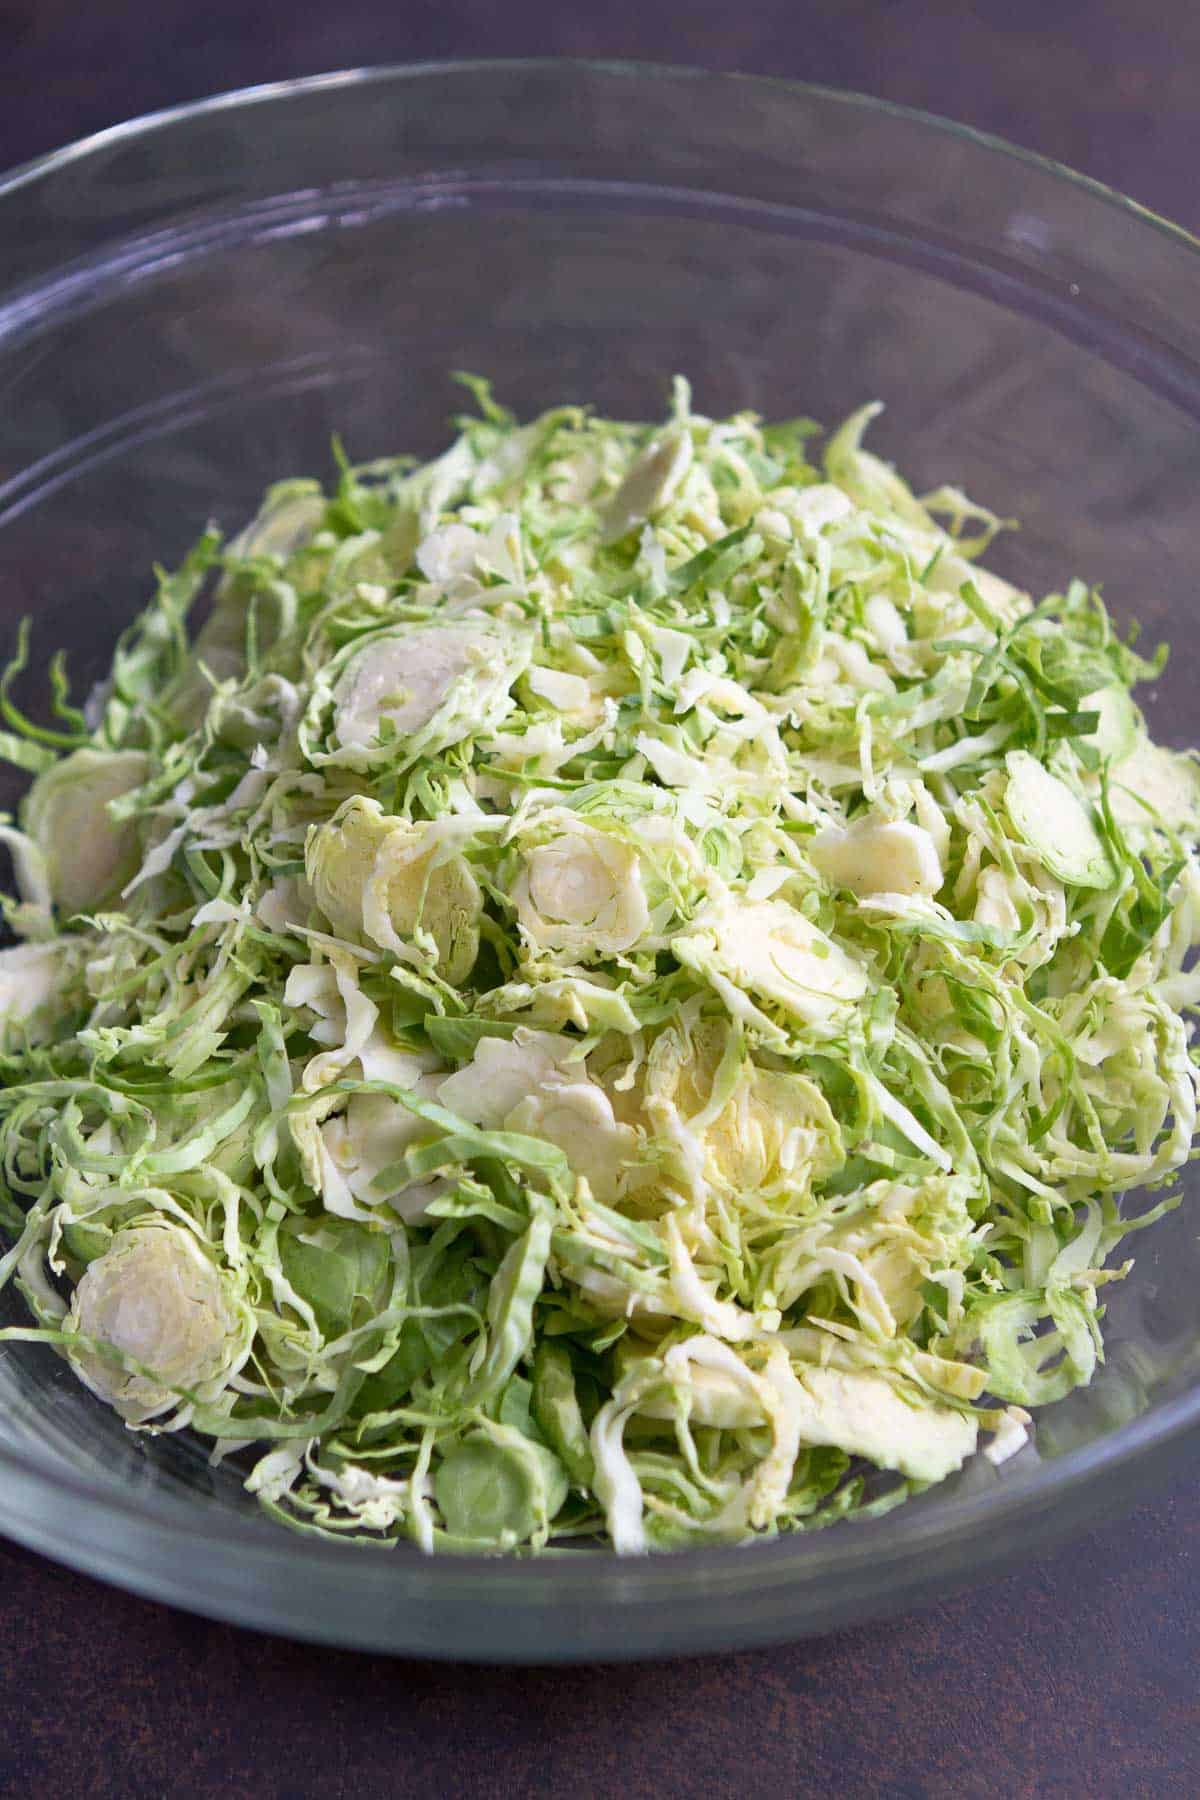 Shredded Brussels sprouts in a glass bowl.